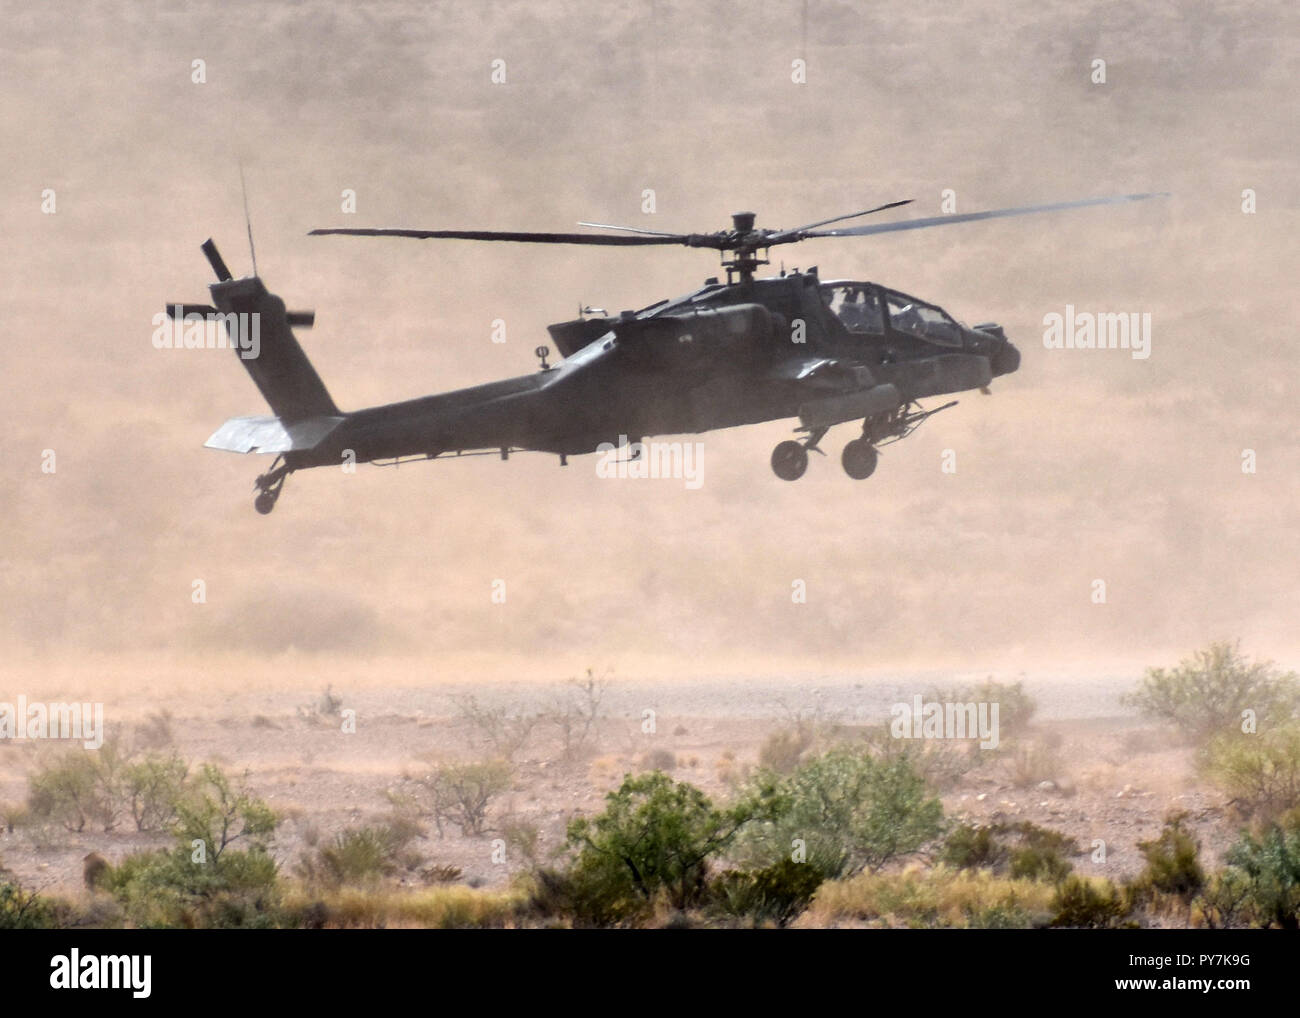 An AH-64 Apache assigned to 3rd Squadron, 6th Cavalry Regiment, Combat Aviation Brigade, 1st Armored Division lands during gunnery training at Doña Ana Range, N.M., Oct. 11, 2018. Stock Photo